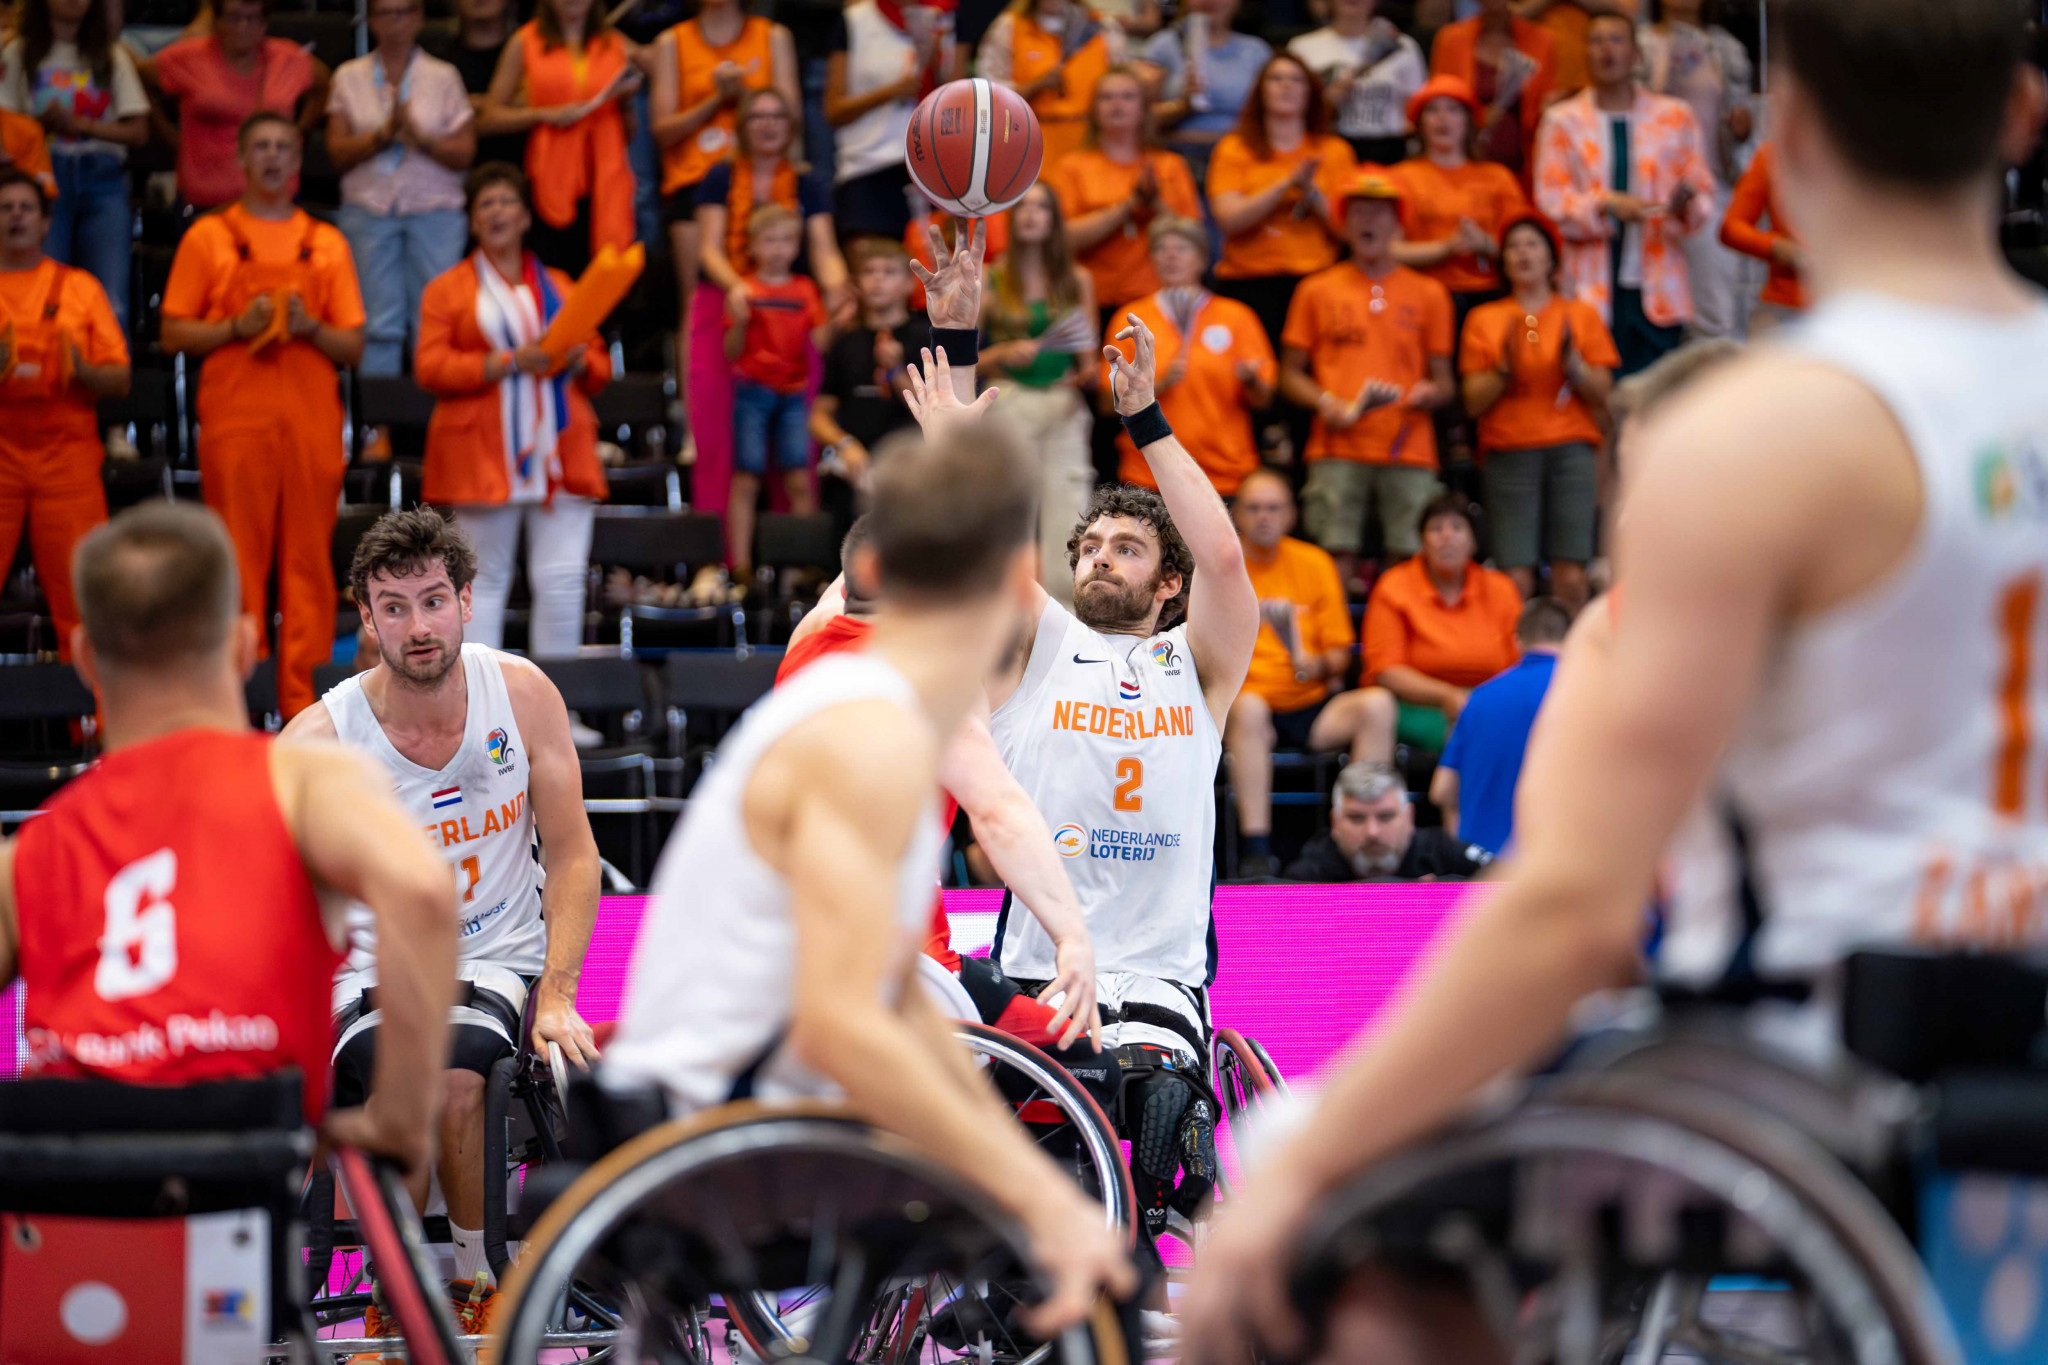 The Netherlands thrilled the home crowd with their 73-61 win over Poland at the Rotterdam Ahoy ©EPC